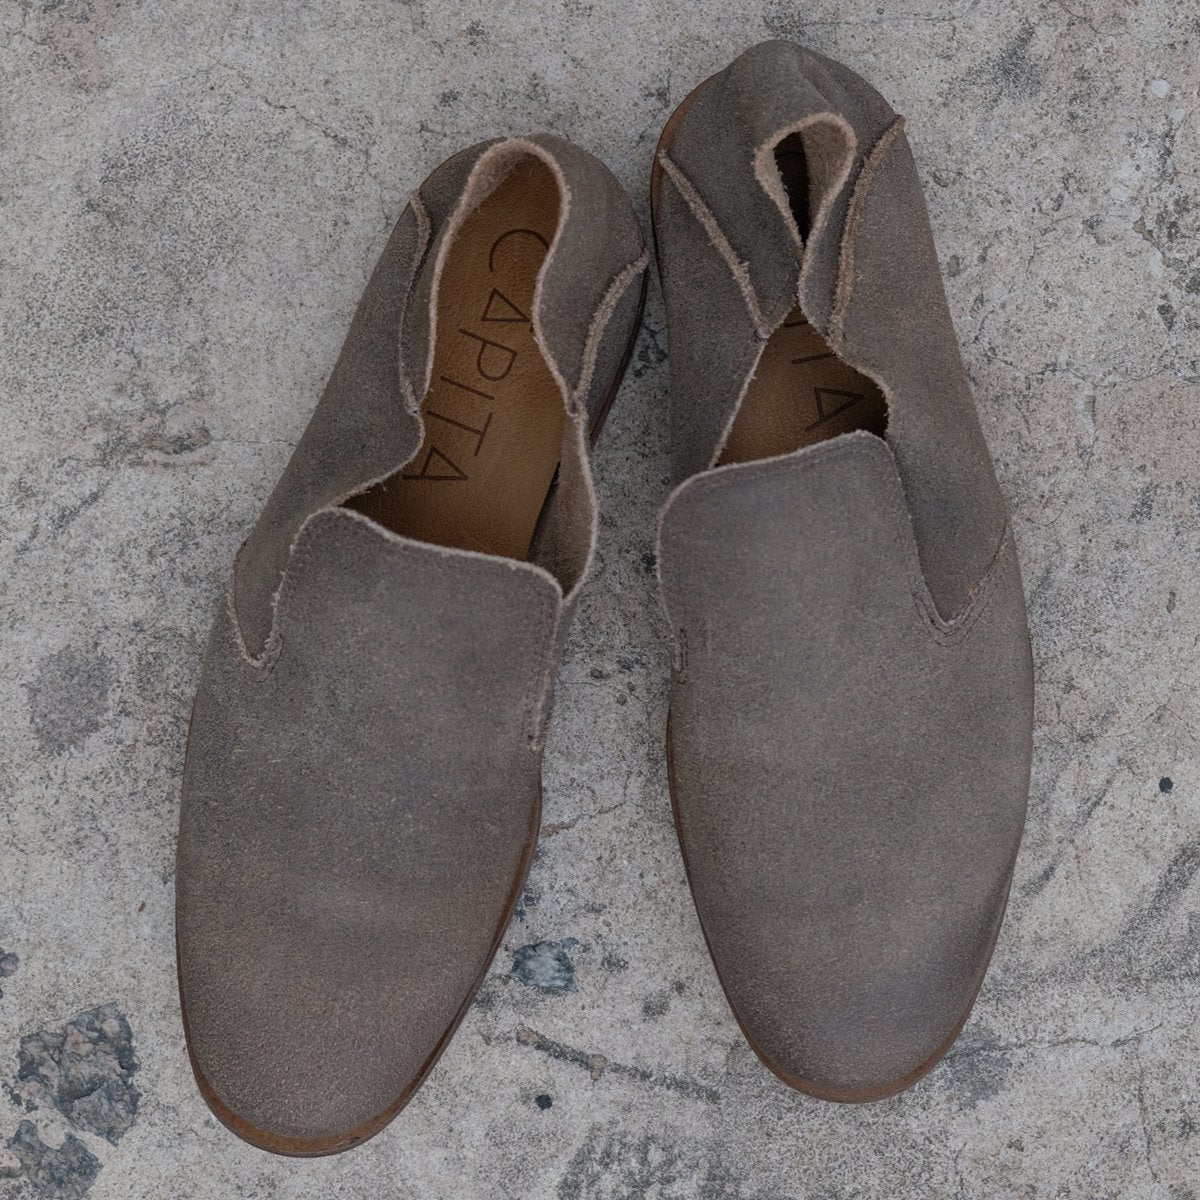 Saxon Rust - suede leather shoes